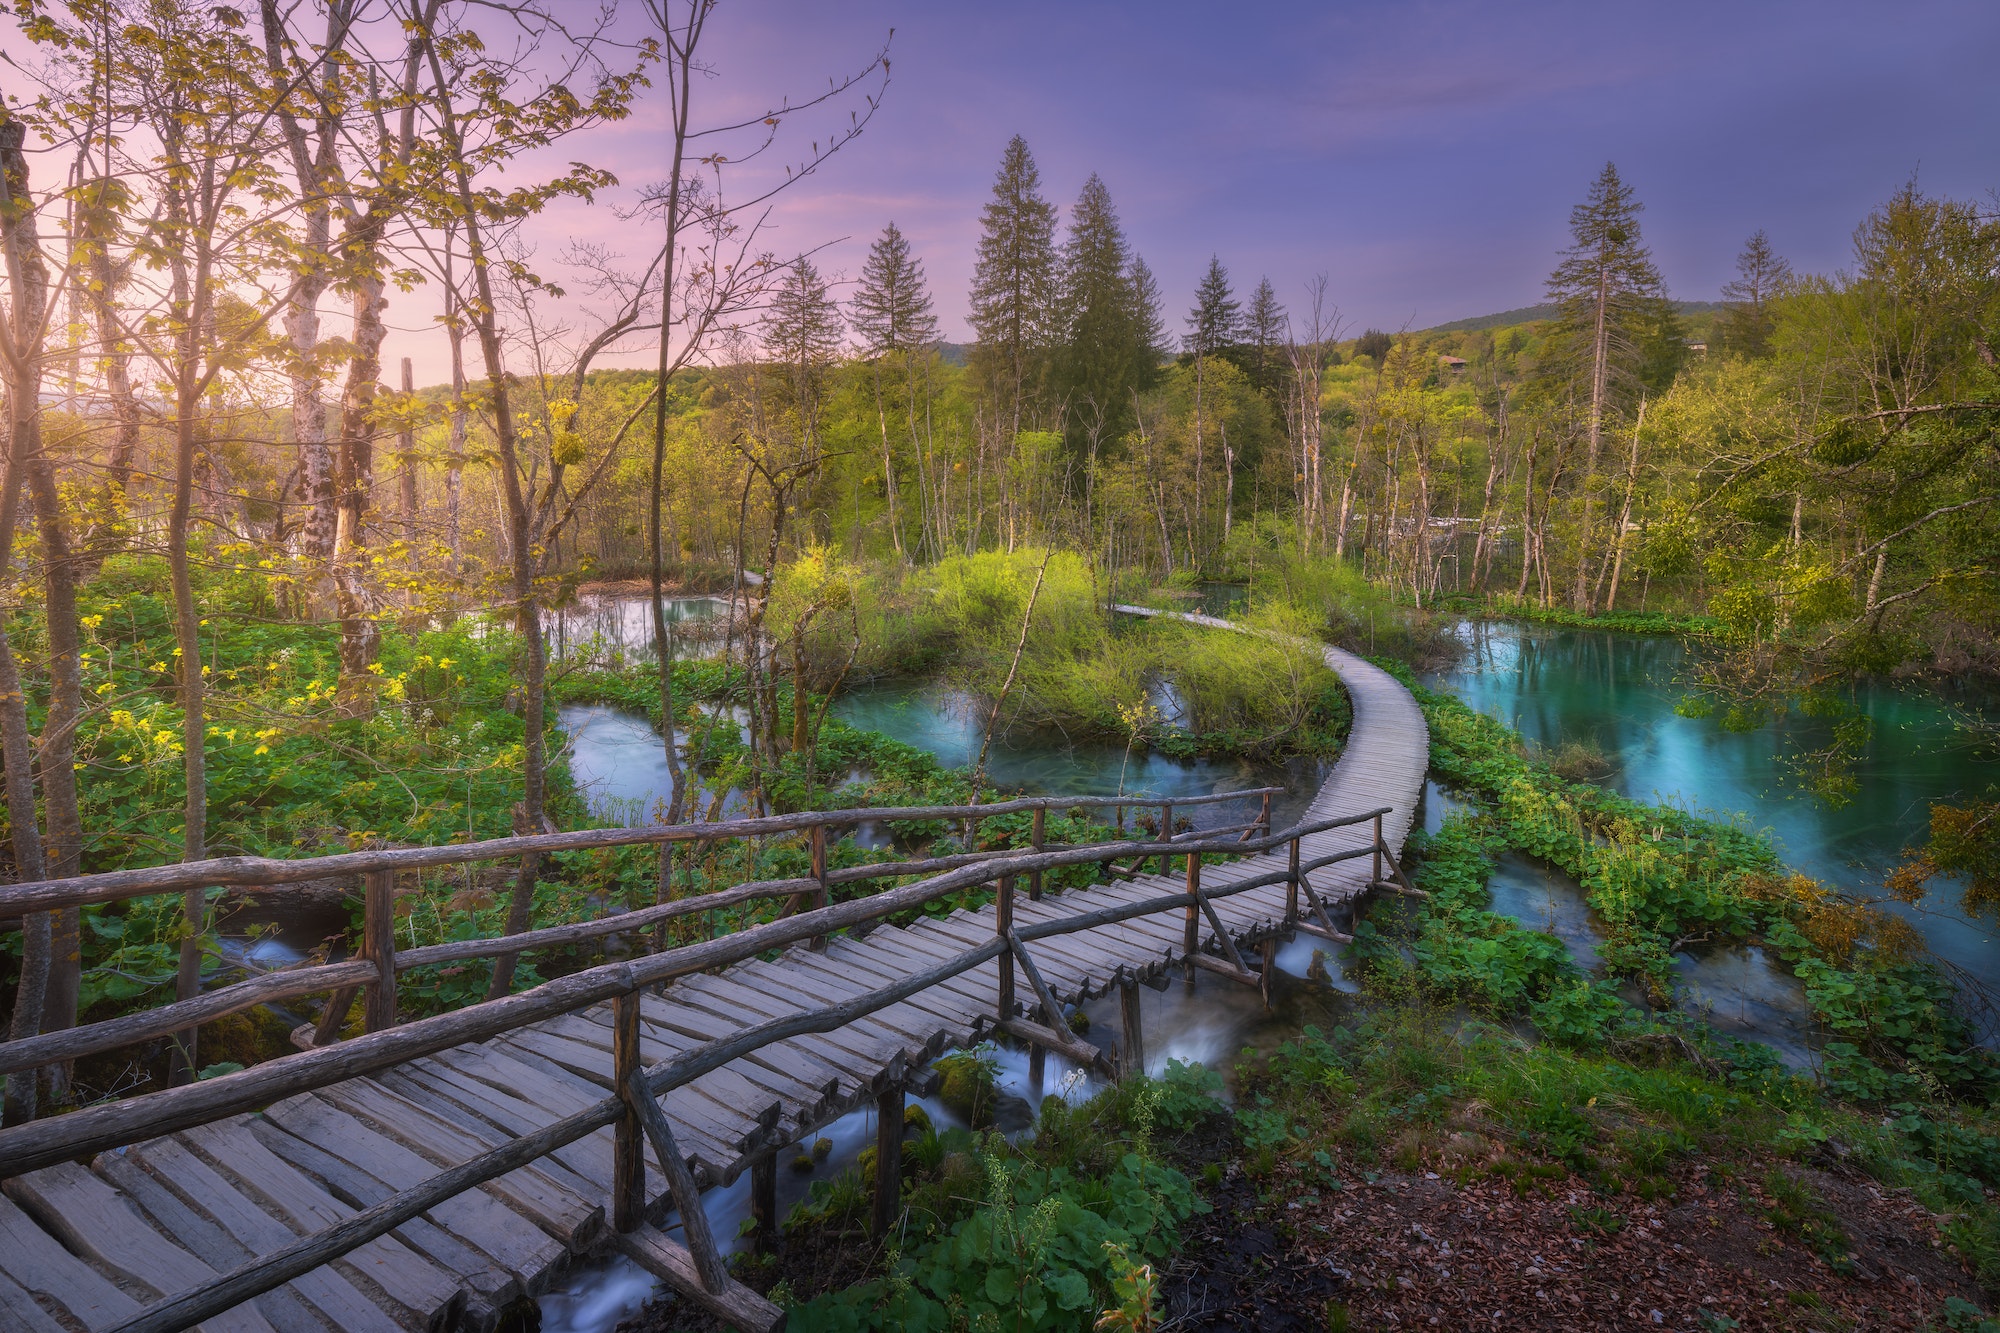 Wooden path in green forest in Plitvice Lakes, Croatia at sunset